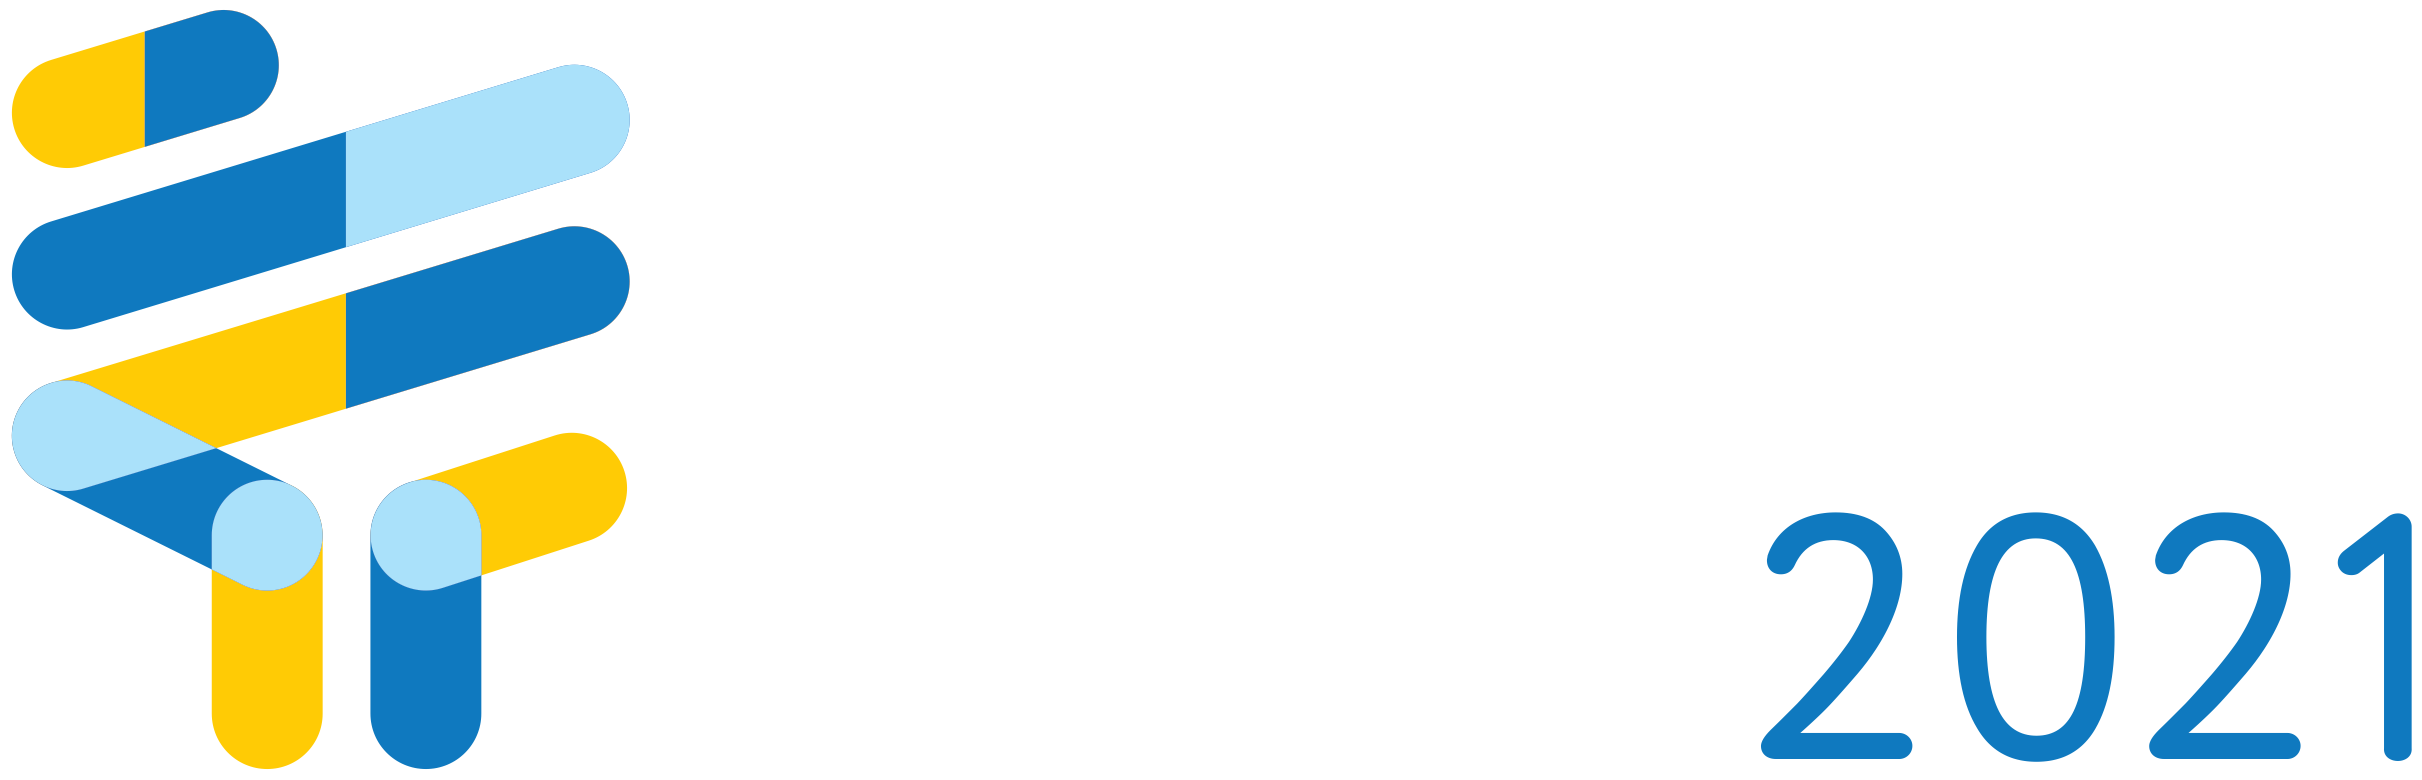 AREOPAG OZE 2021